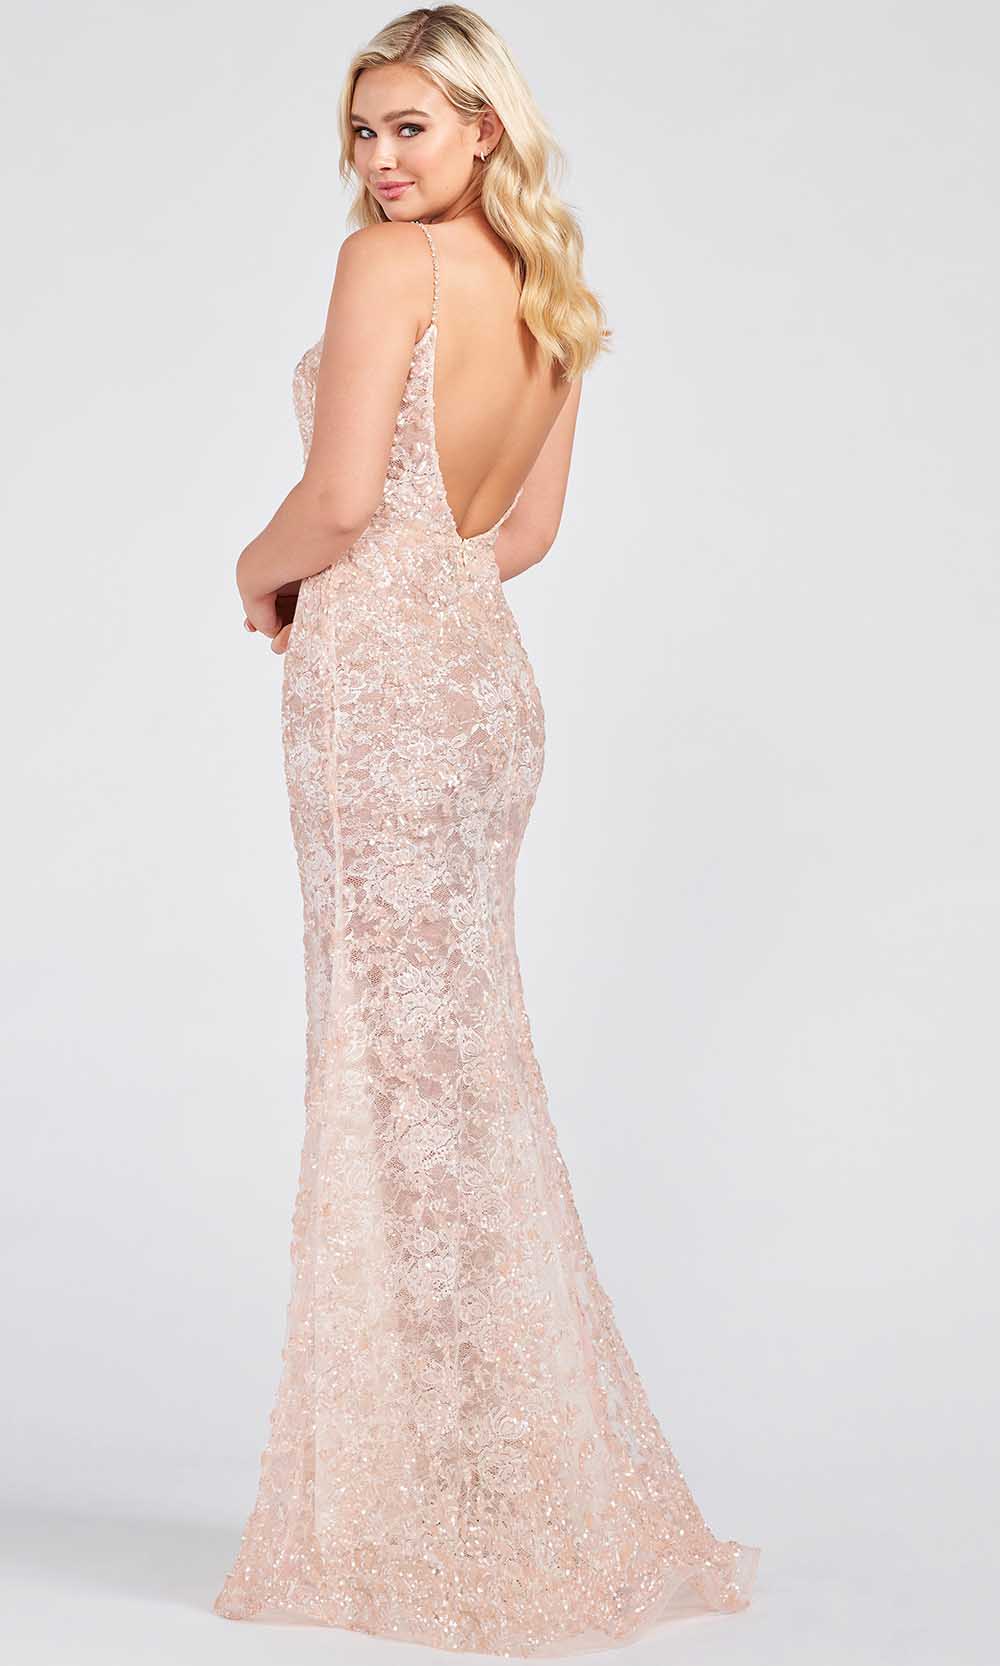 Ellie Wilde EW122004 - Sequin Lace Prom Gown Prom Dresses